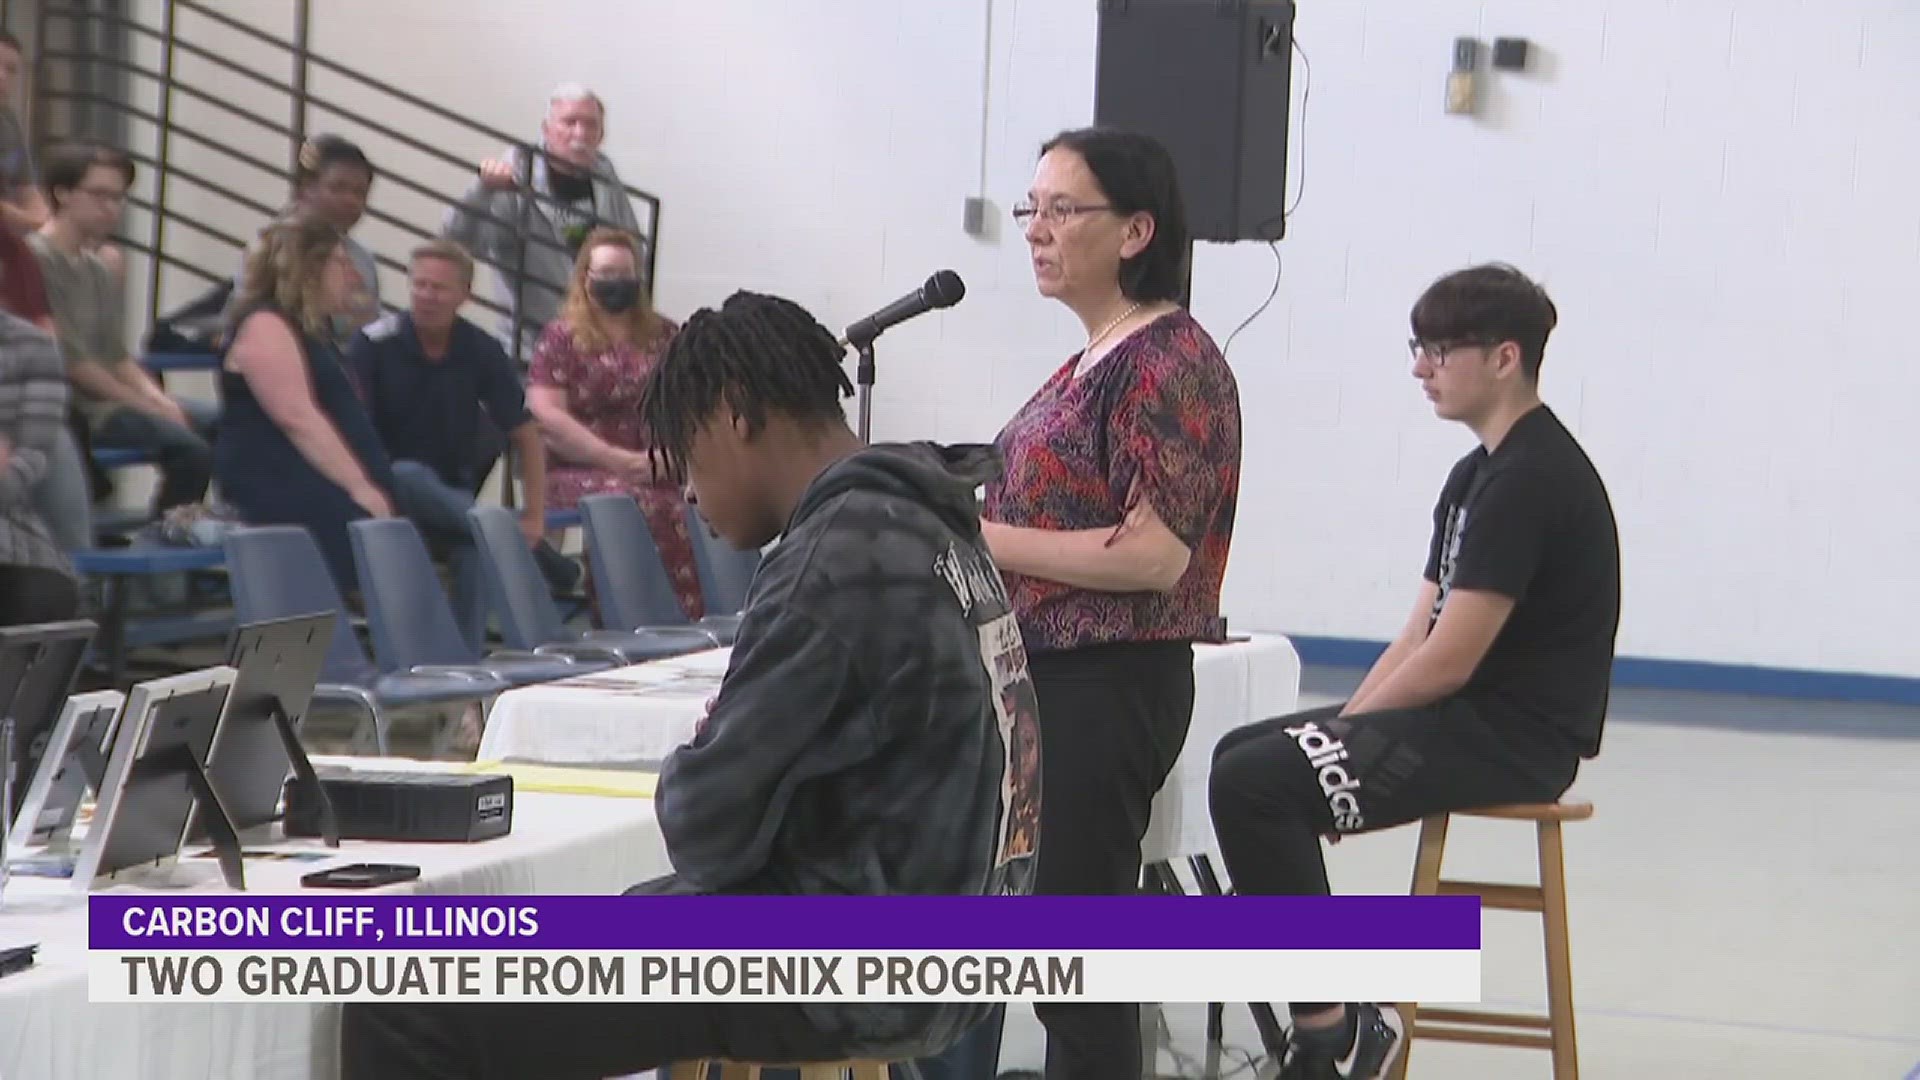 Two students graduated from the Blackhawk Phoenix program. The program works with students experiencing struggles in a regular high school setting.